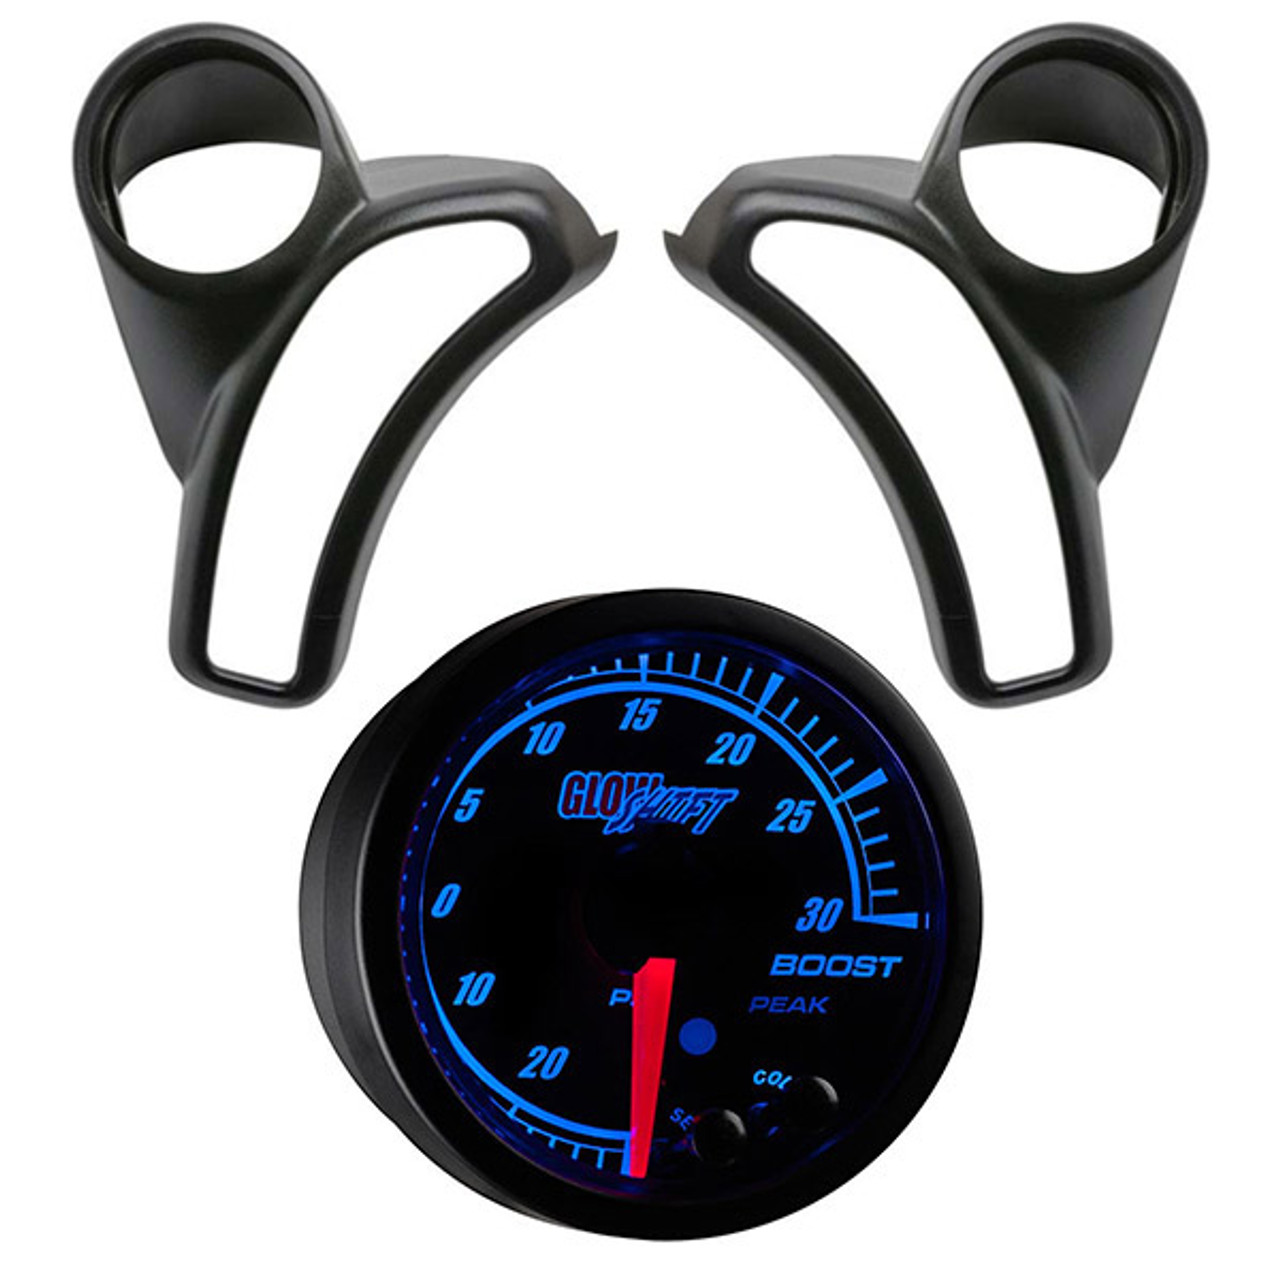 GlowShift Tinted Color 10 000 RPM Tachometer Gauge For 1-10 Cylinder Gas Powered Engines Built-In Shift Light Mounts On Dashboard Black D - 4